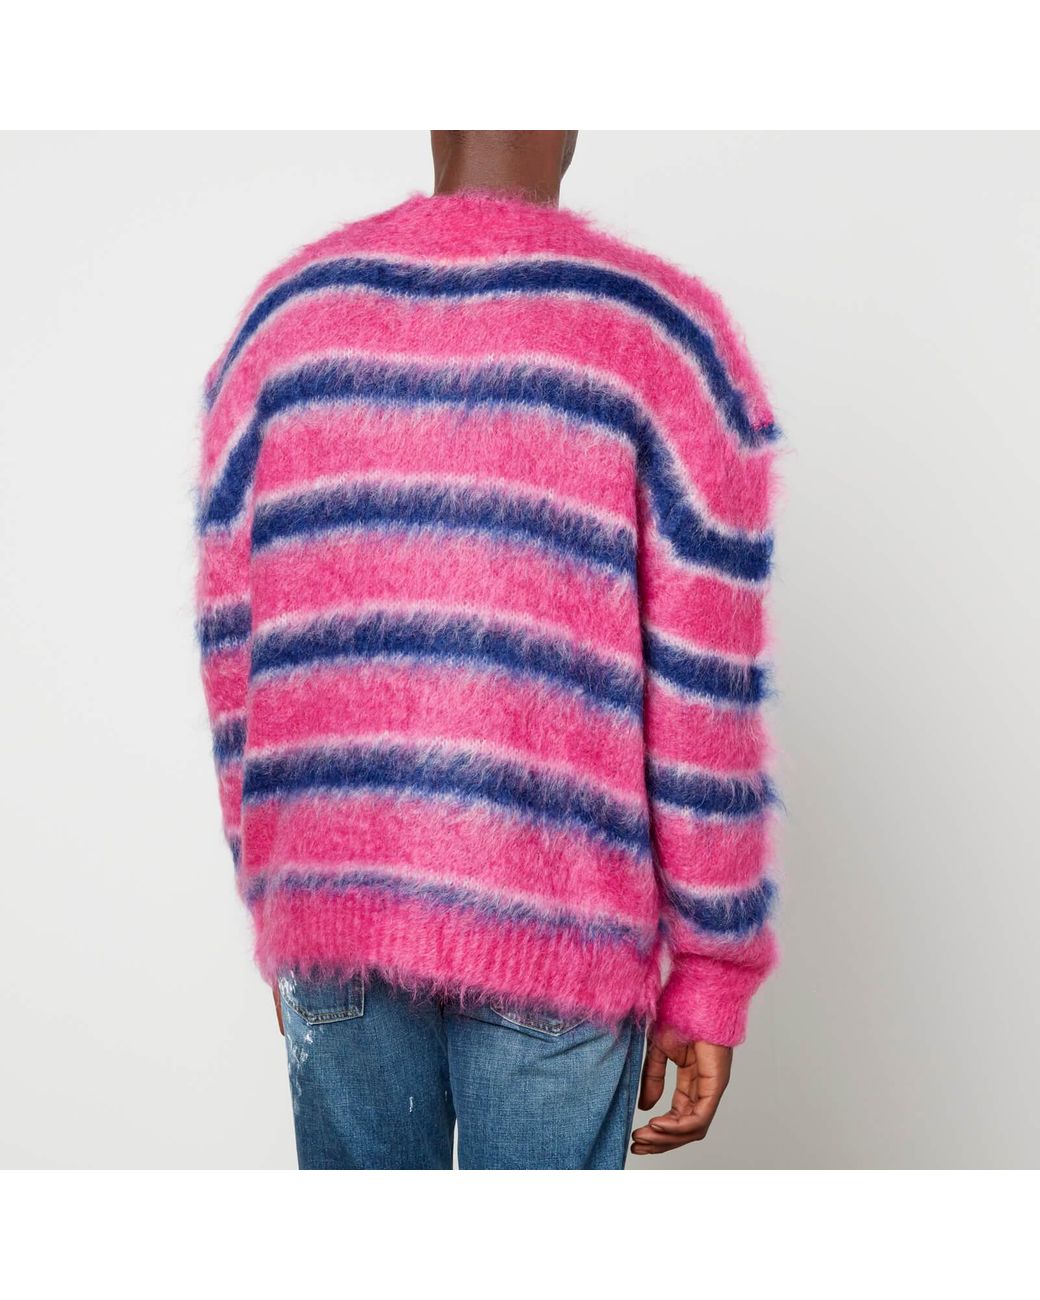 Marni Striped Brushed Intarsia Mohair blend Jumper in Pink for Men